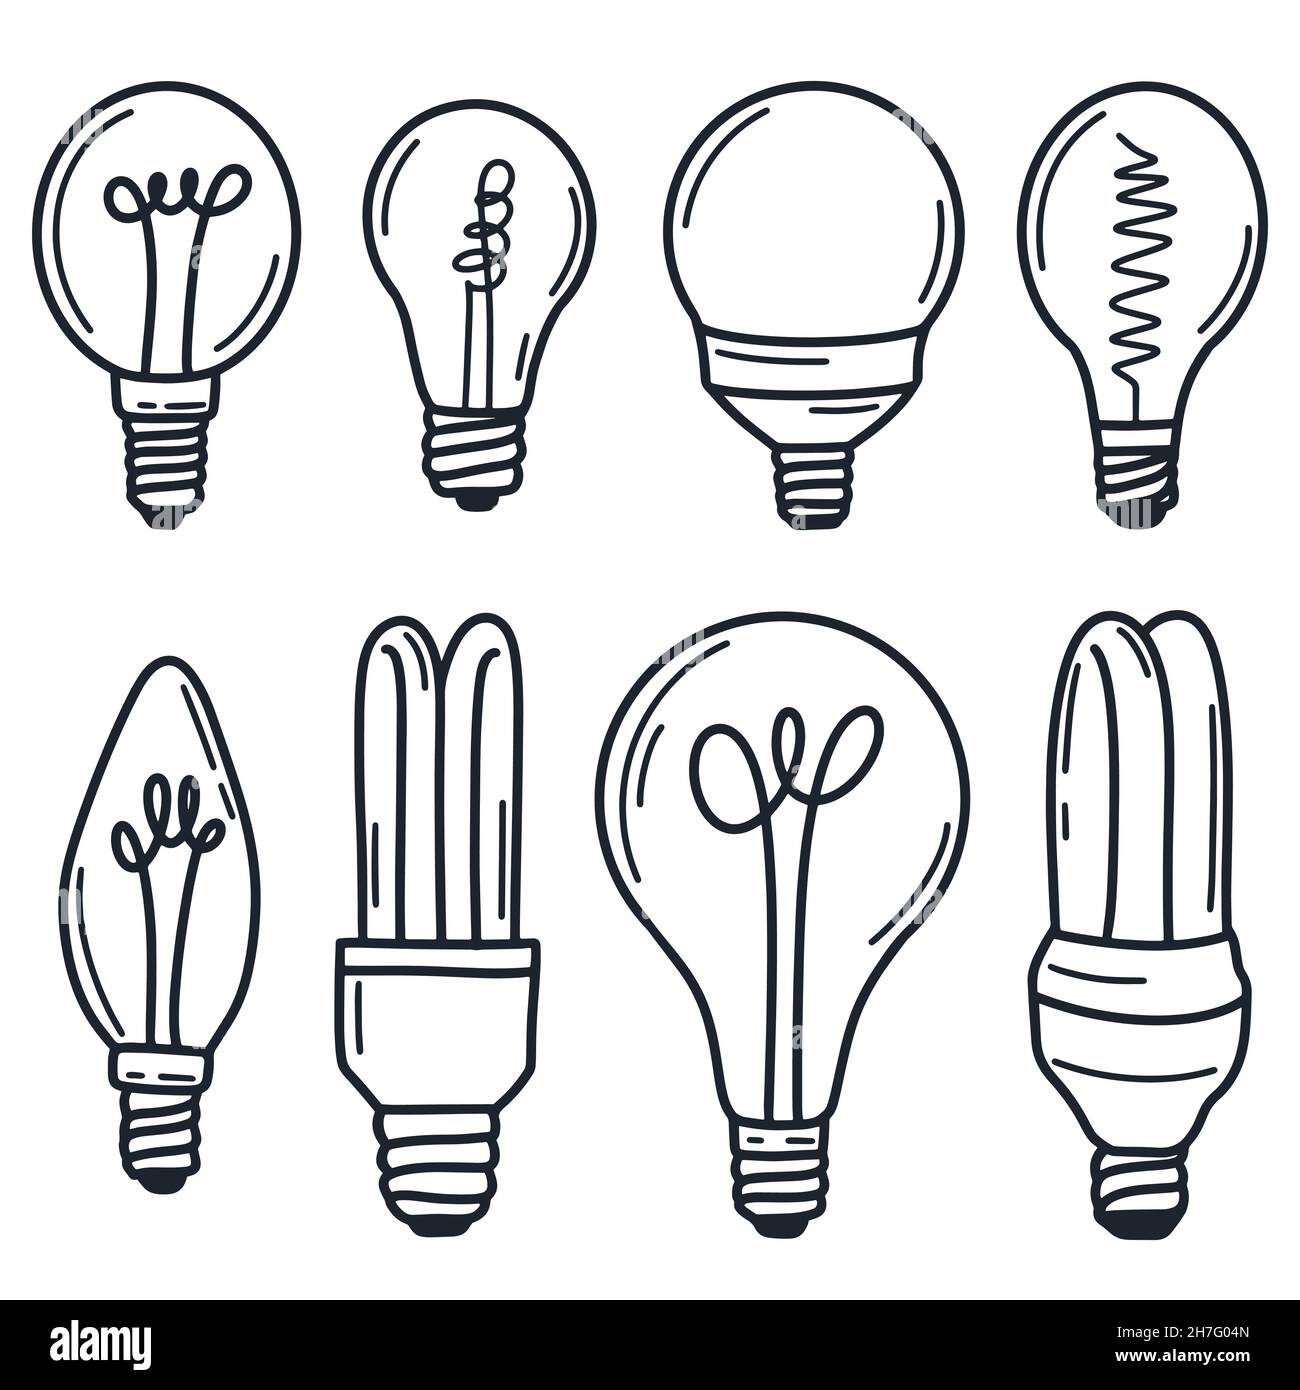 Lightbulb set, hand drawing doodle. Collection of lamps, vector illustration. Bulbs of different shapes and sizes, a source of electricity. Stock Vector